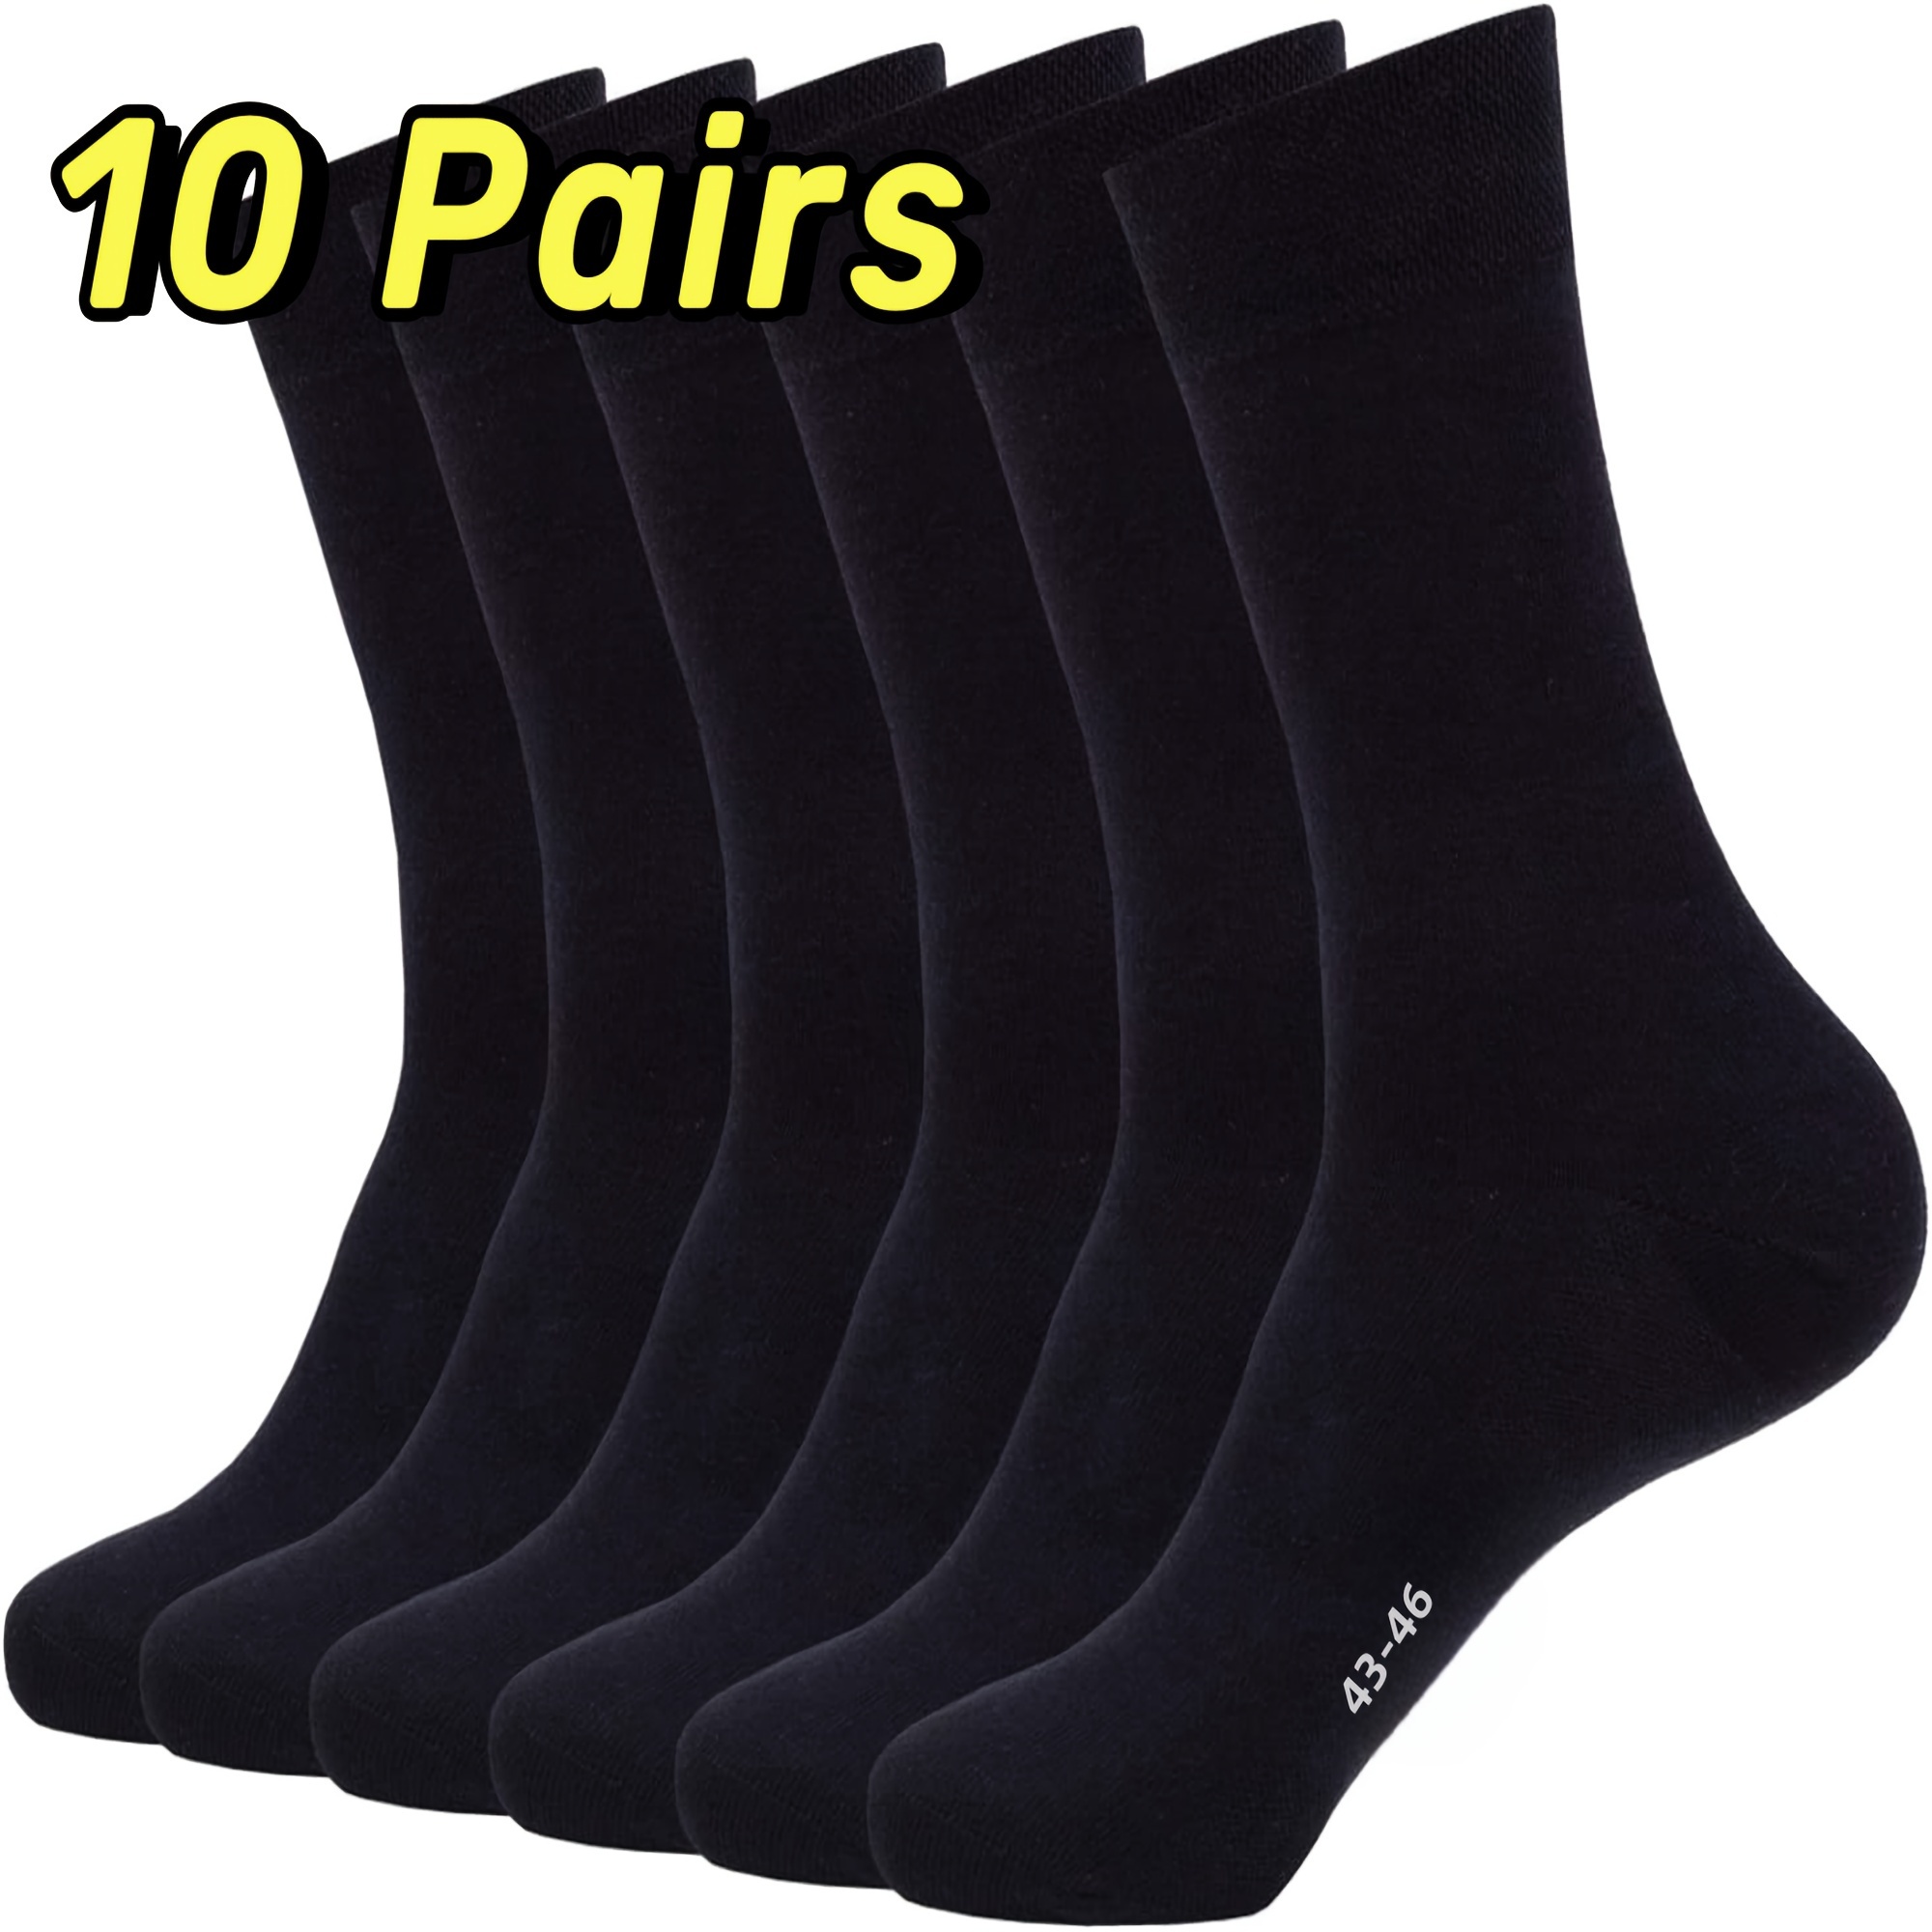 

10 Pairs Of Men's Knitted Anti Odor & Sweat Absorption Crew Socks, Comfy & Breathable, Elastic Casual Socks For Men's Daily Wearing